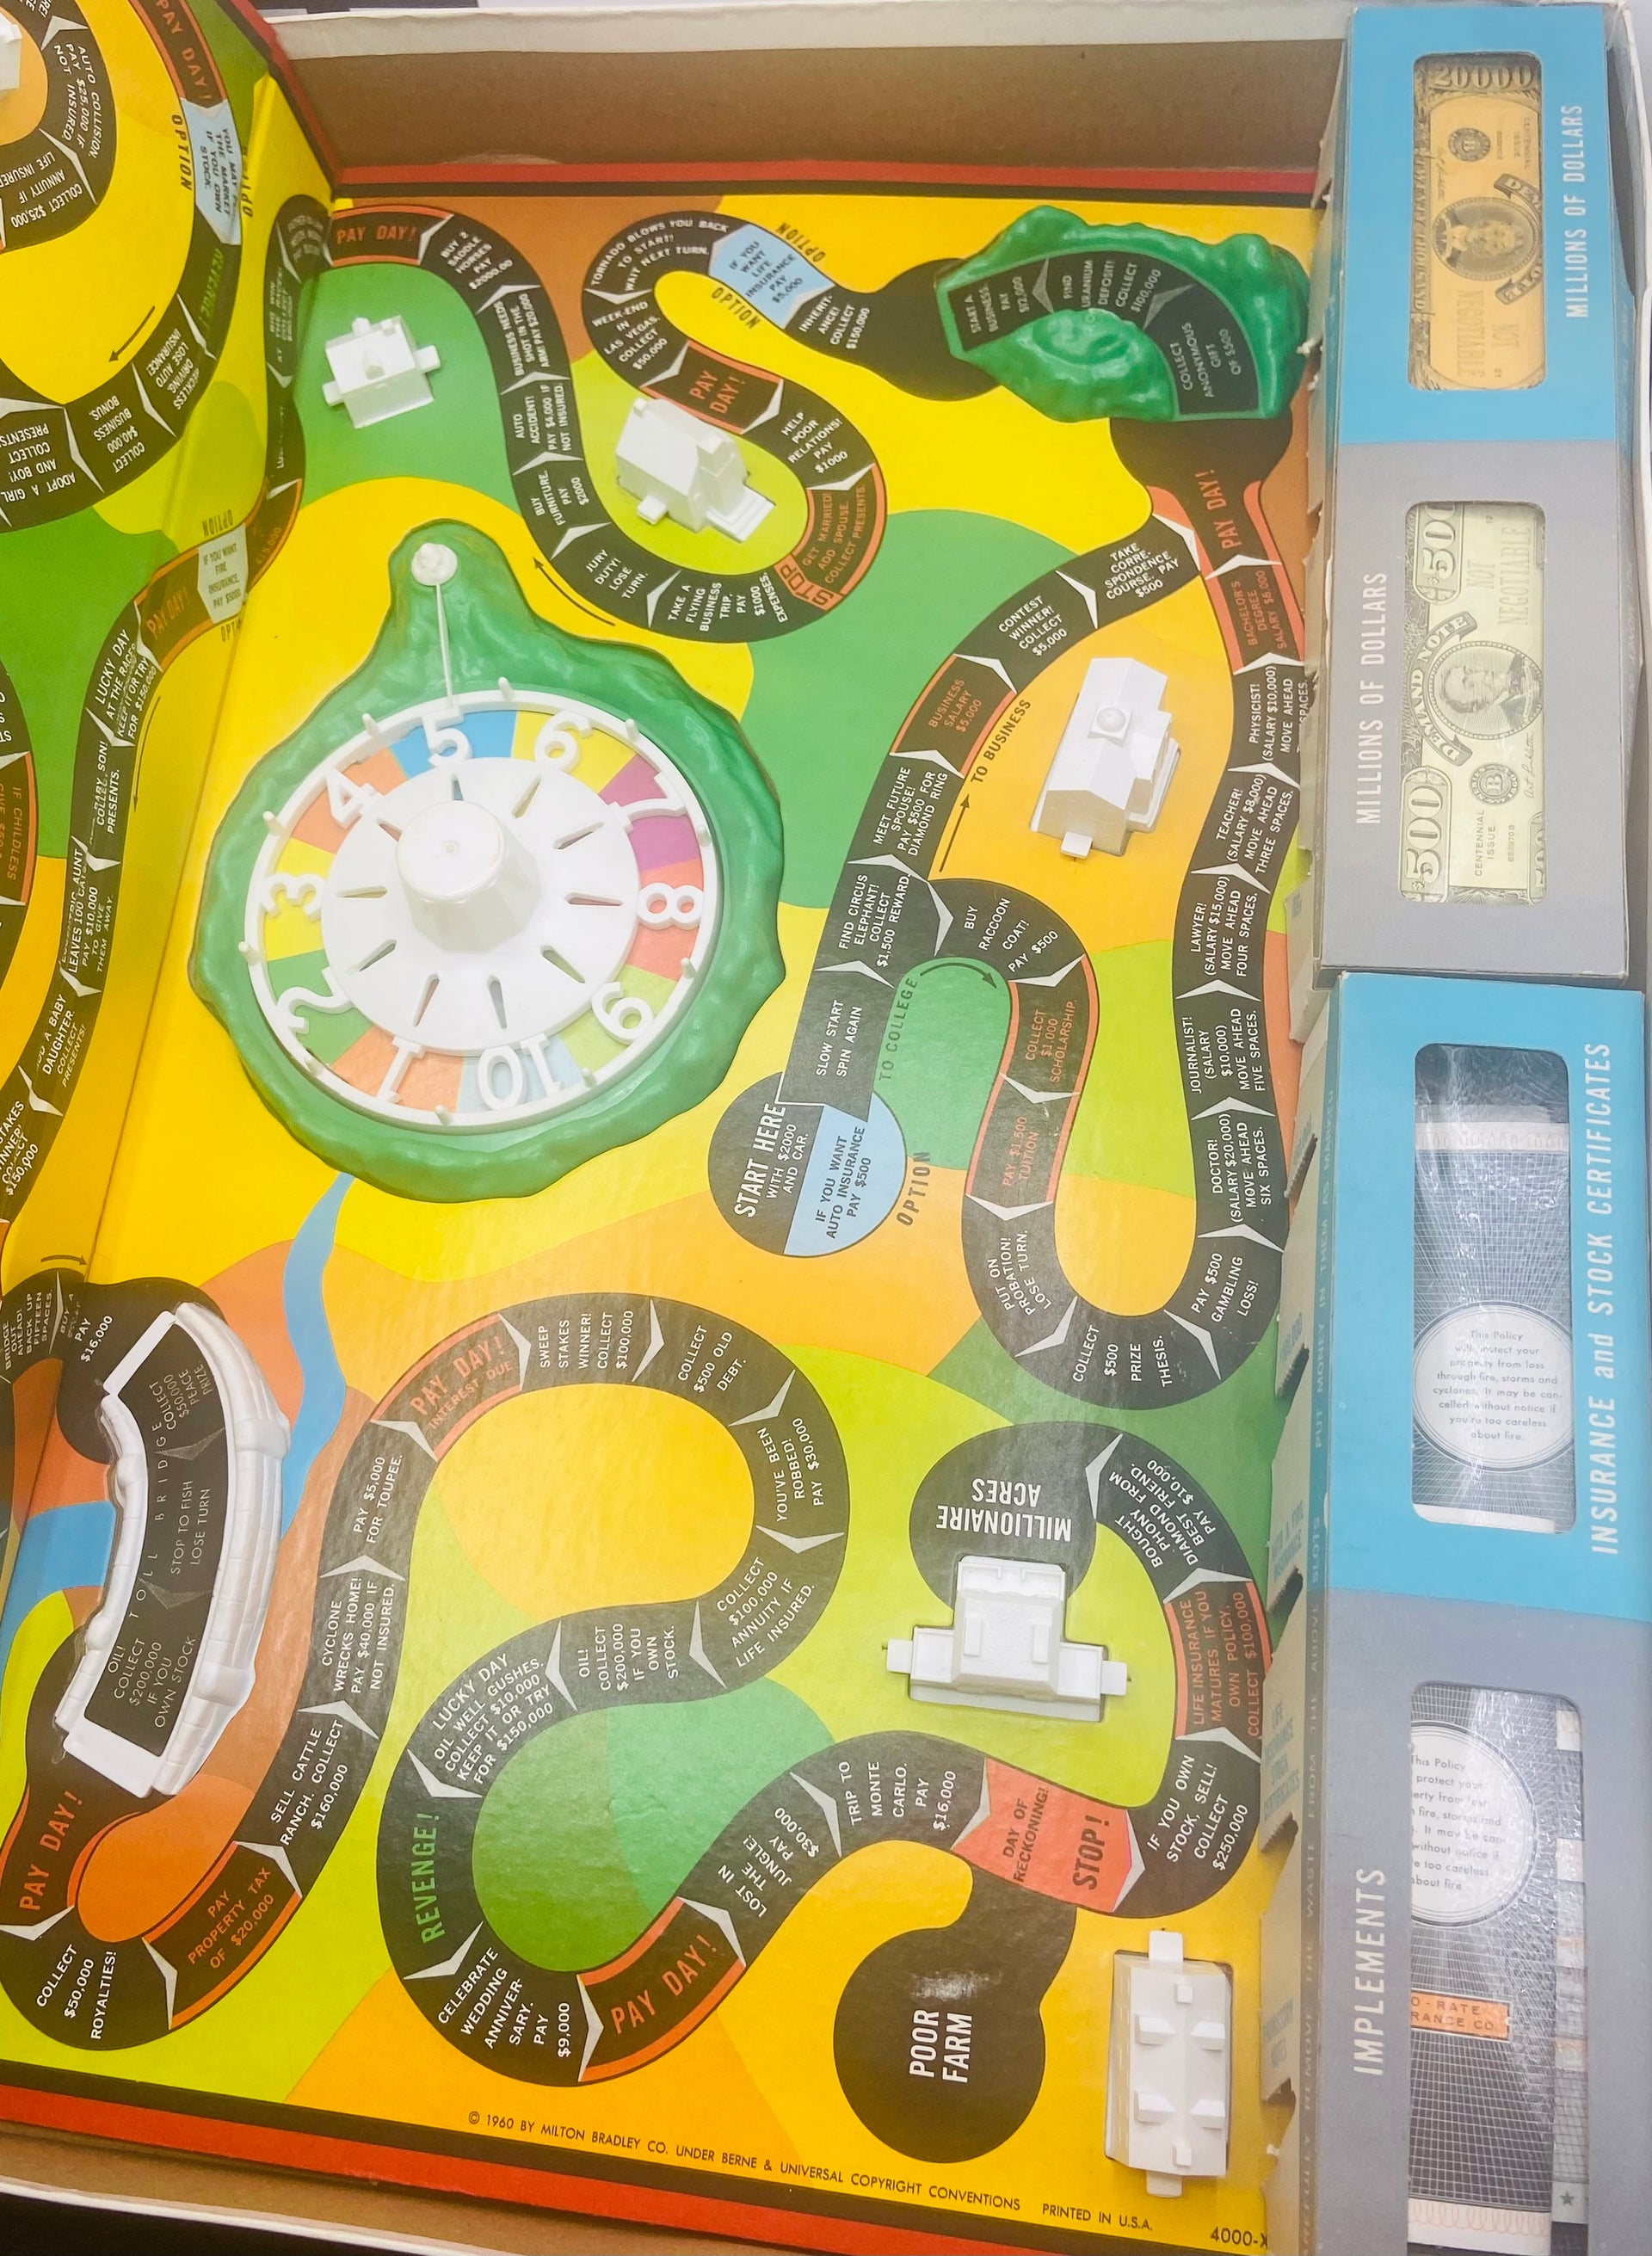 The Game of Life Bauersachs’ Timeless Toys